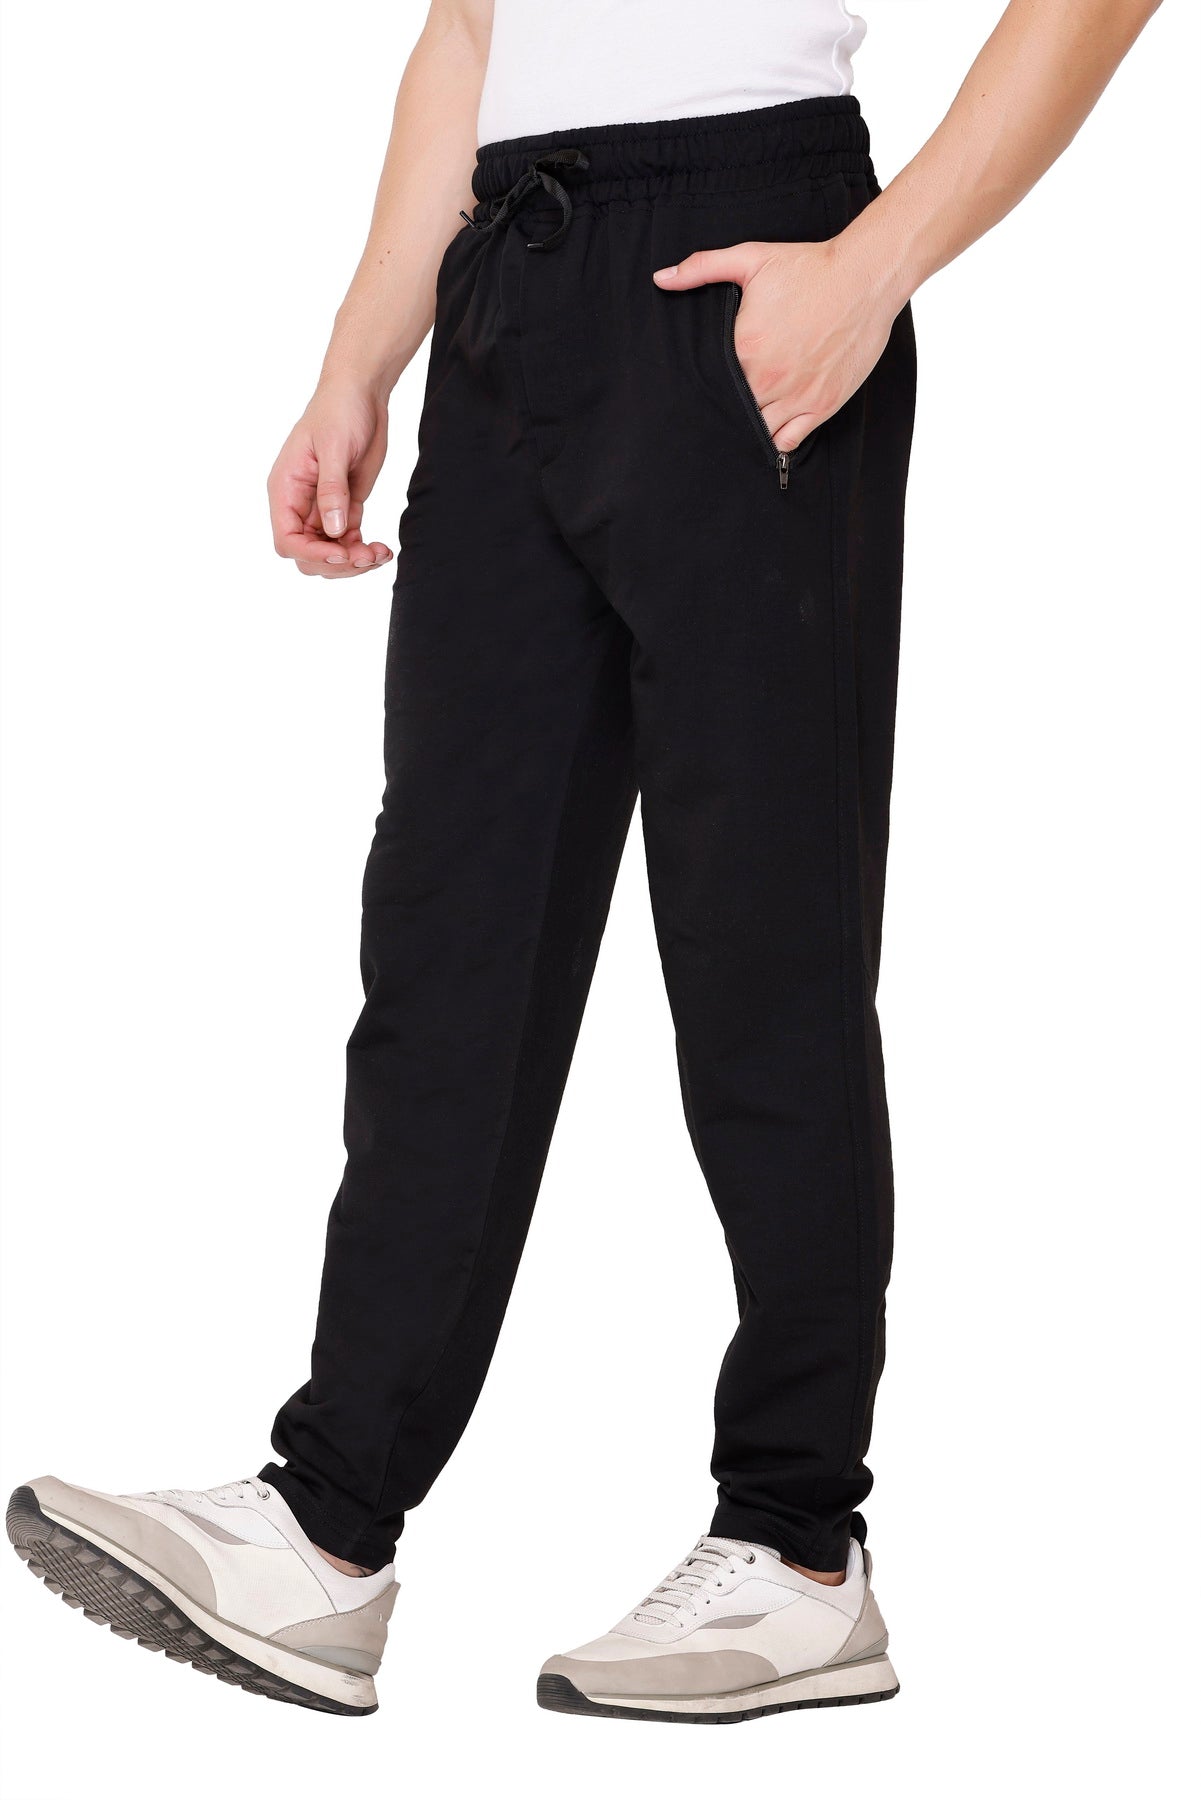 RynoGear Stretchable Track Pant for Men with Zipper Pockets (S, Black &  Navy Blue) : Amazon.in: Clothing & Accessories